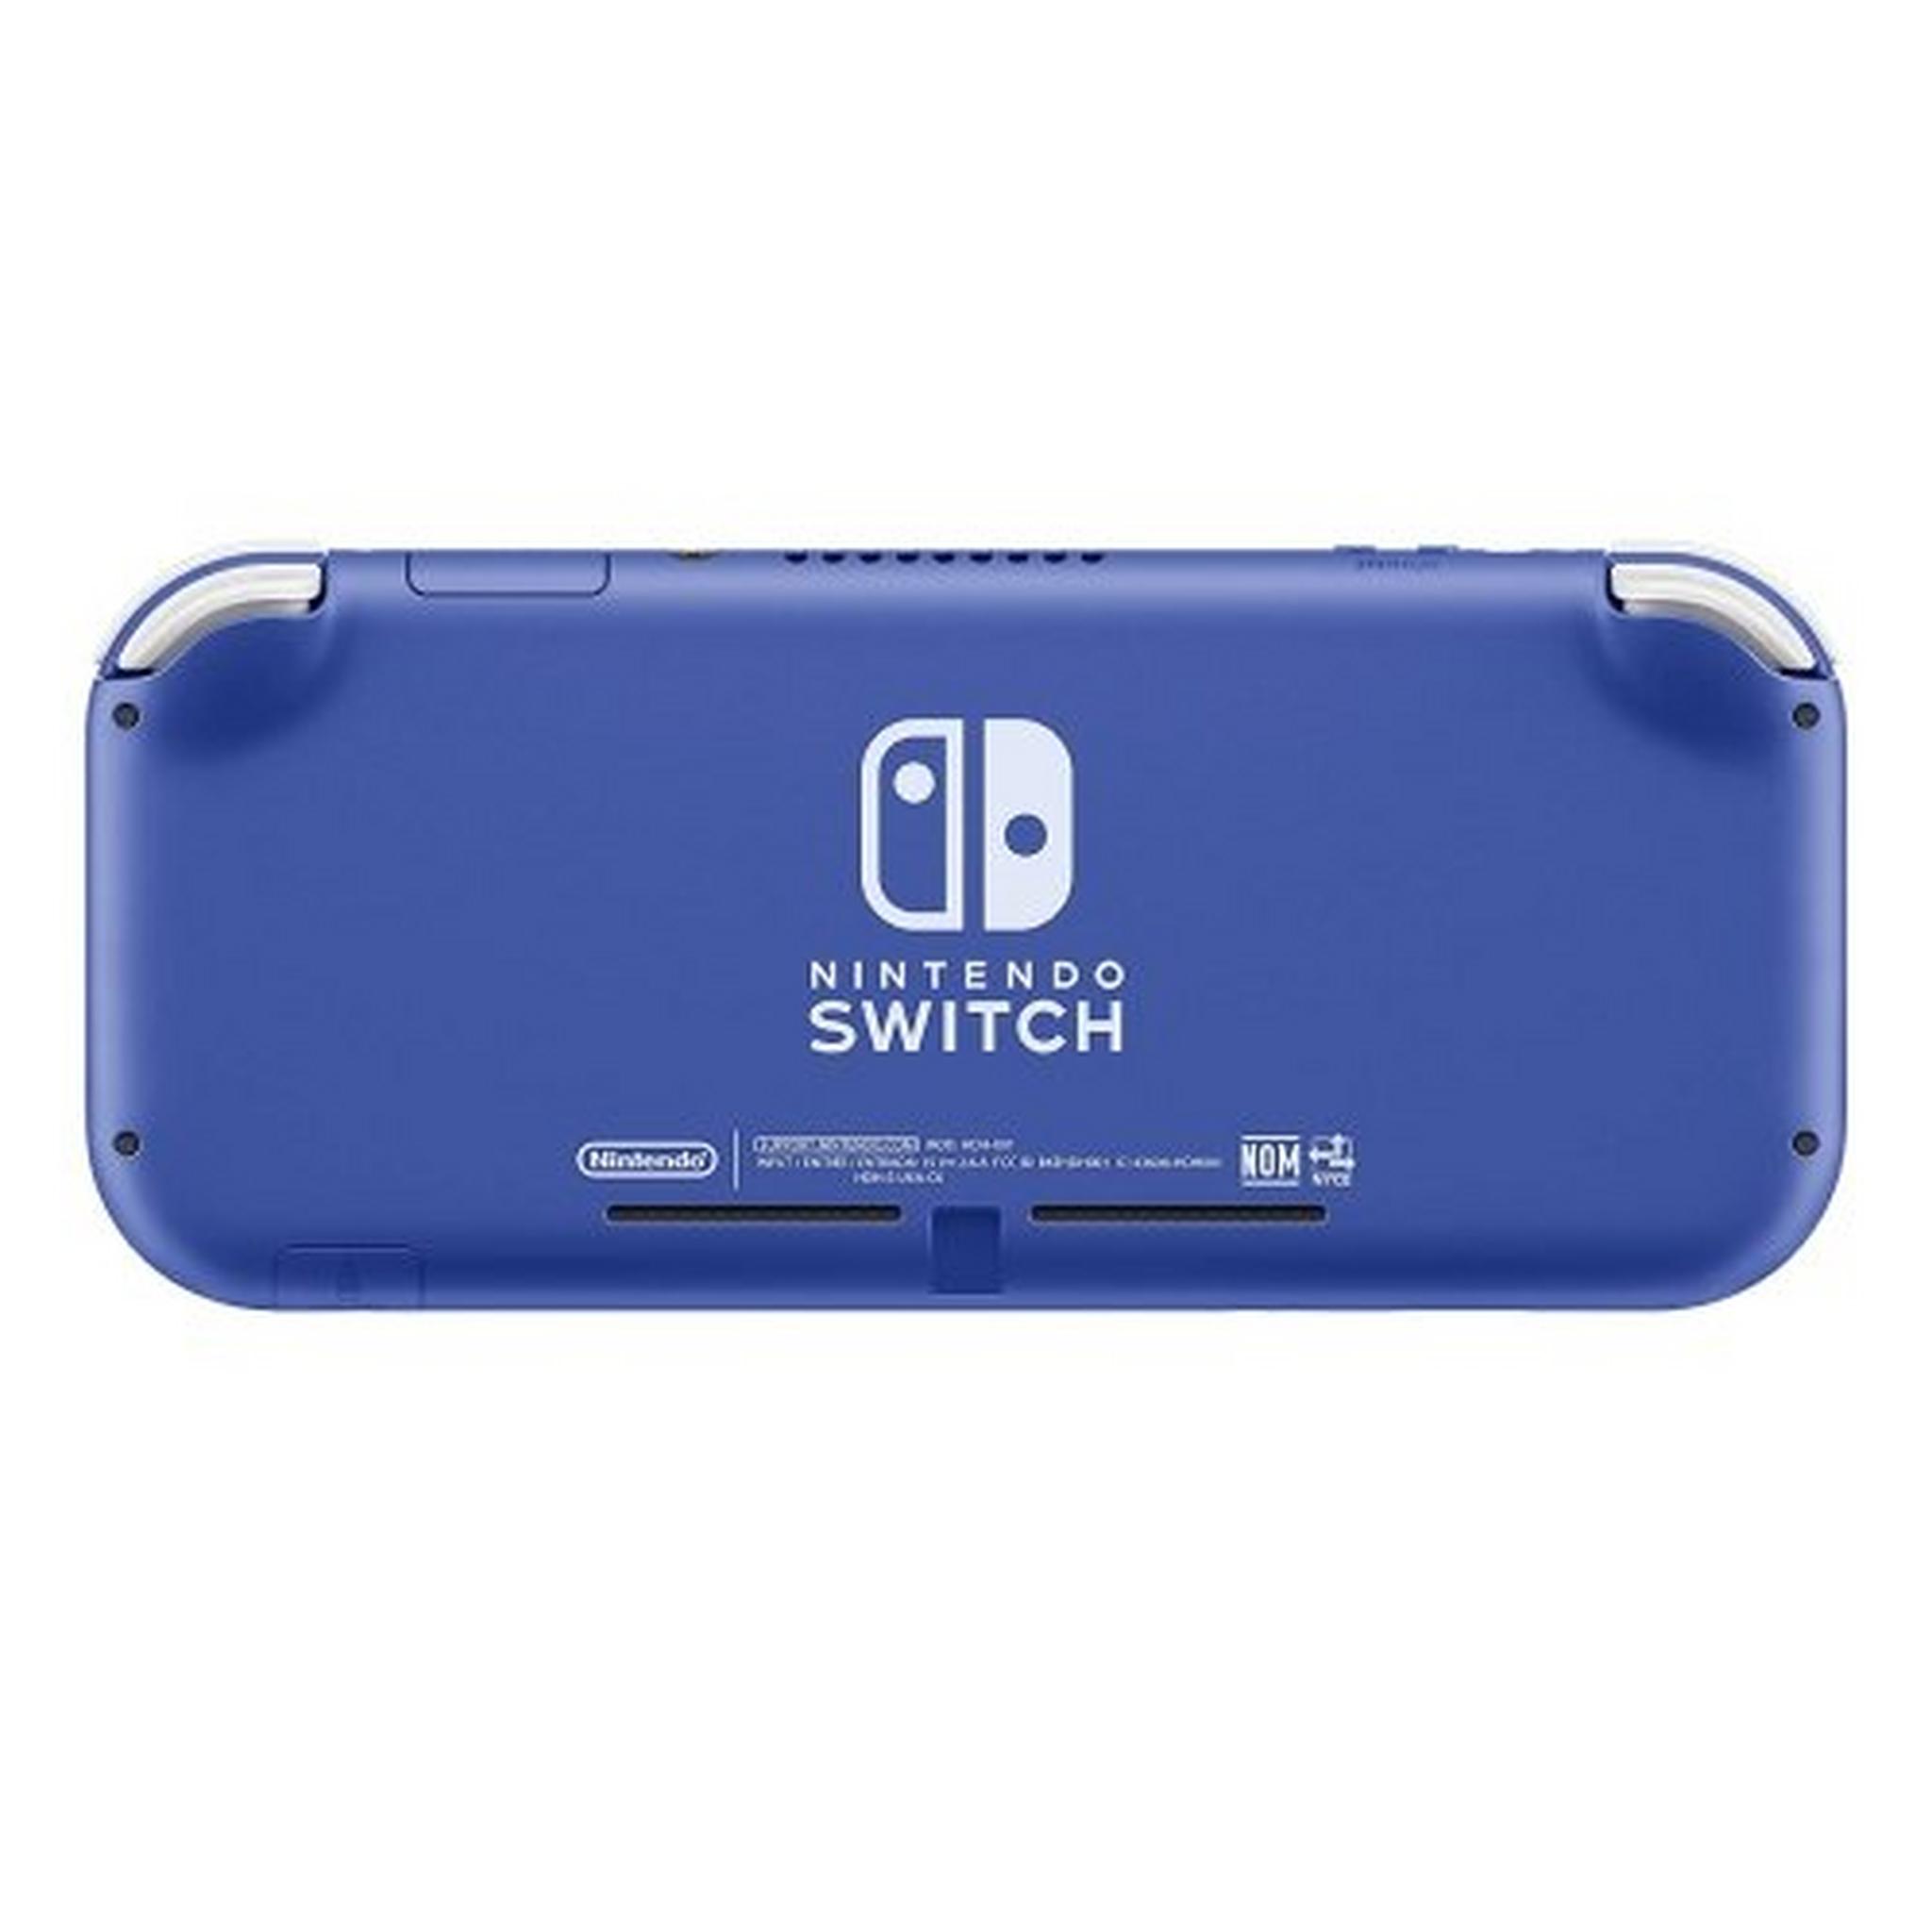 Nintendo Switch Lite Gaming Console - Blue